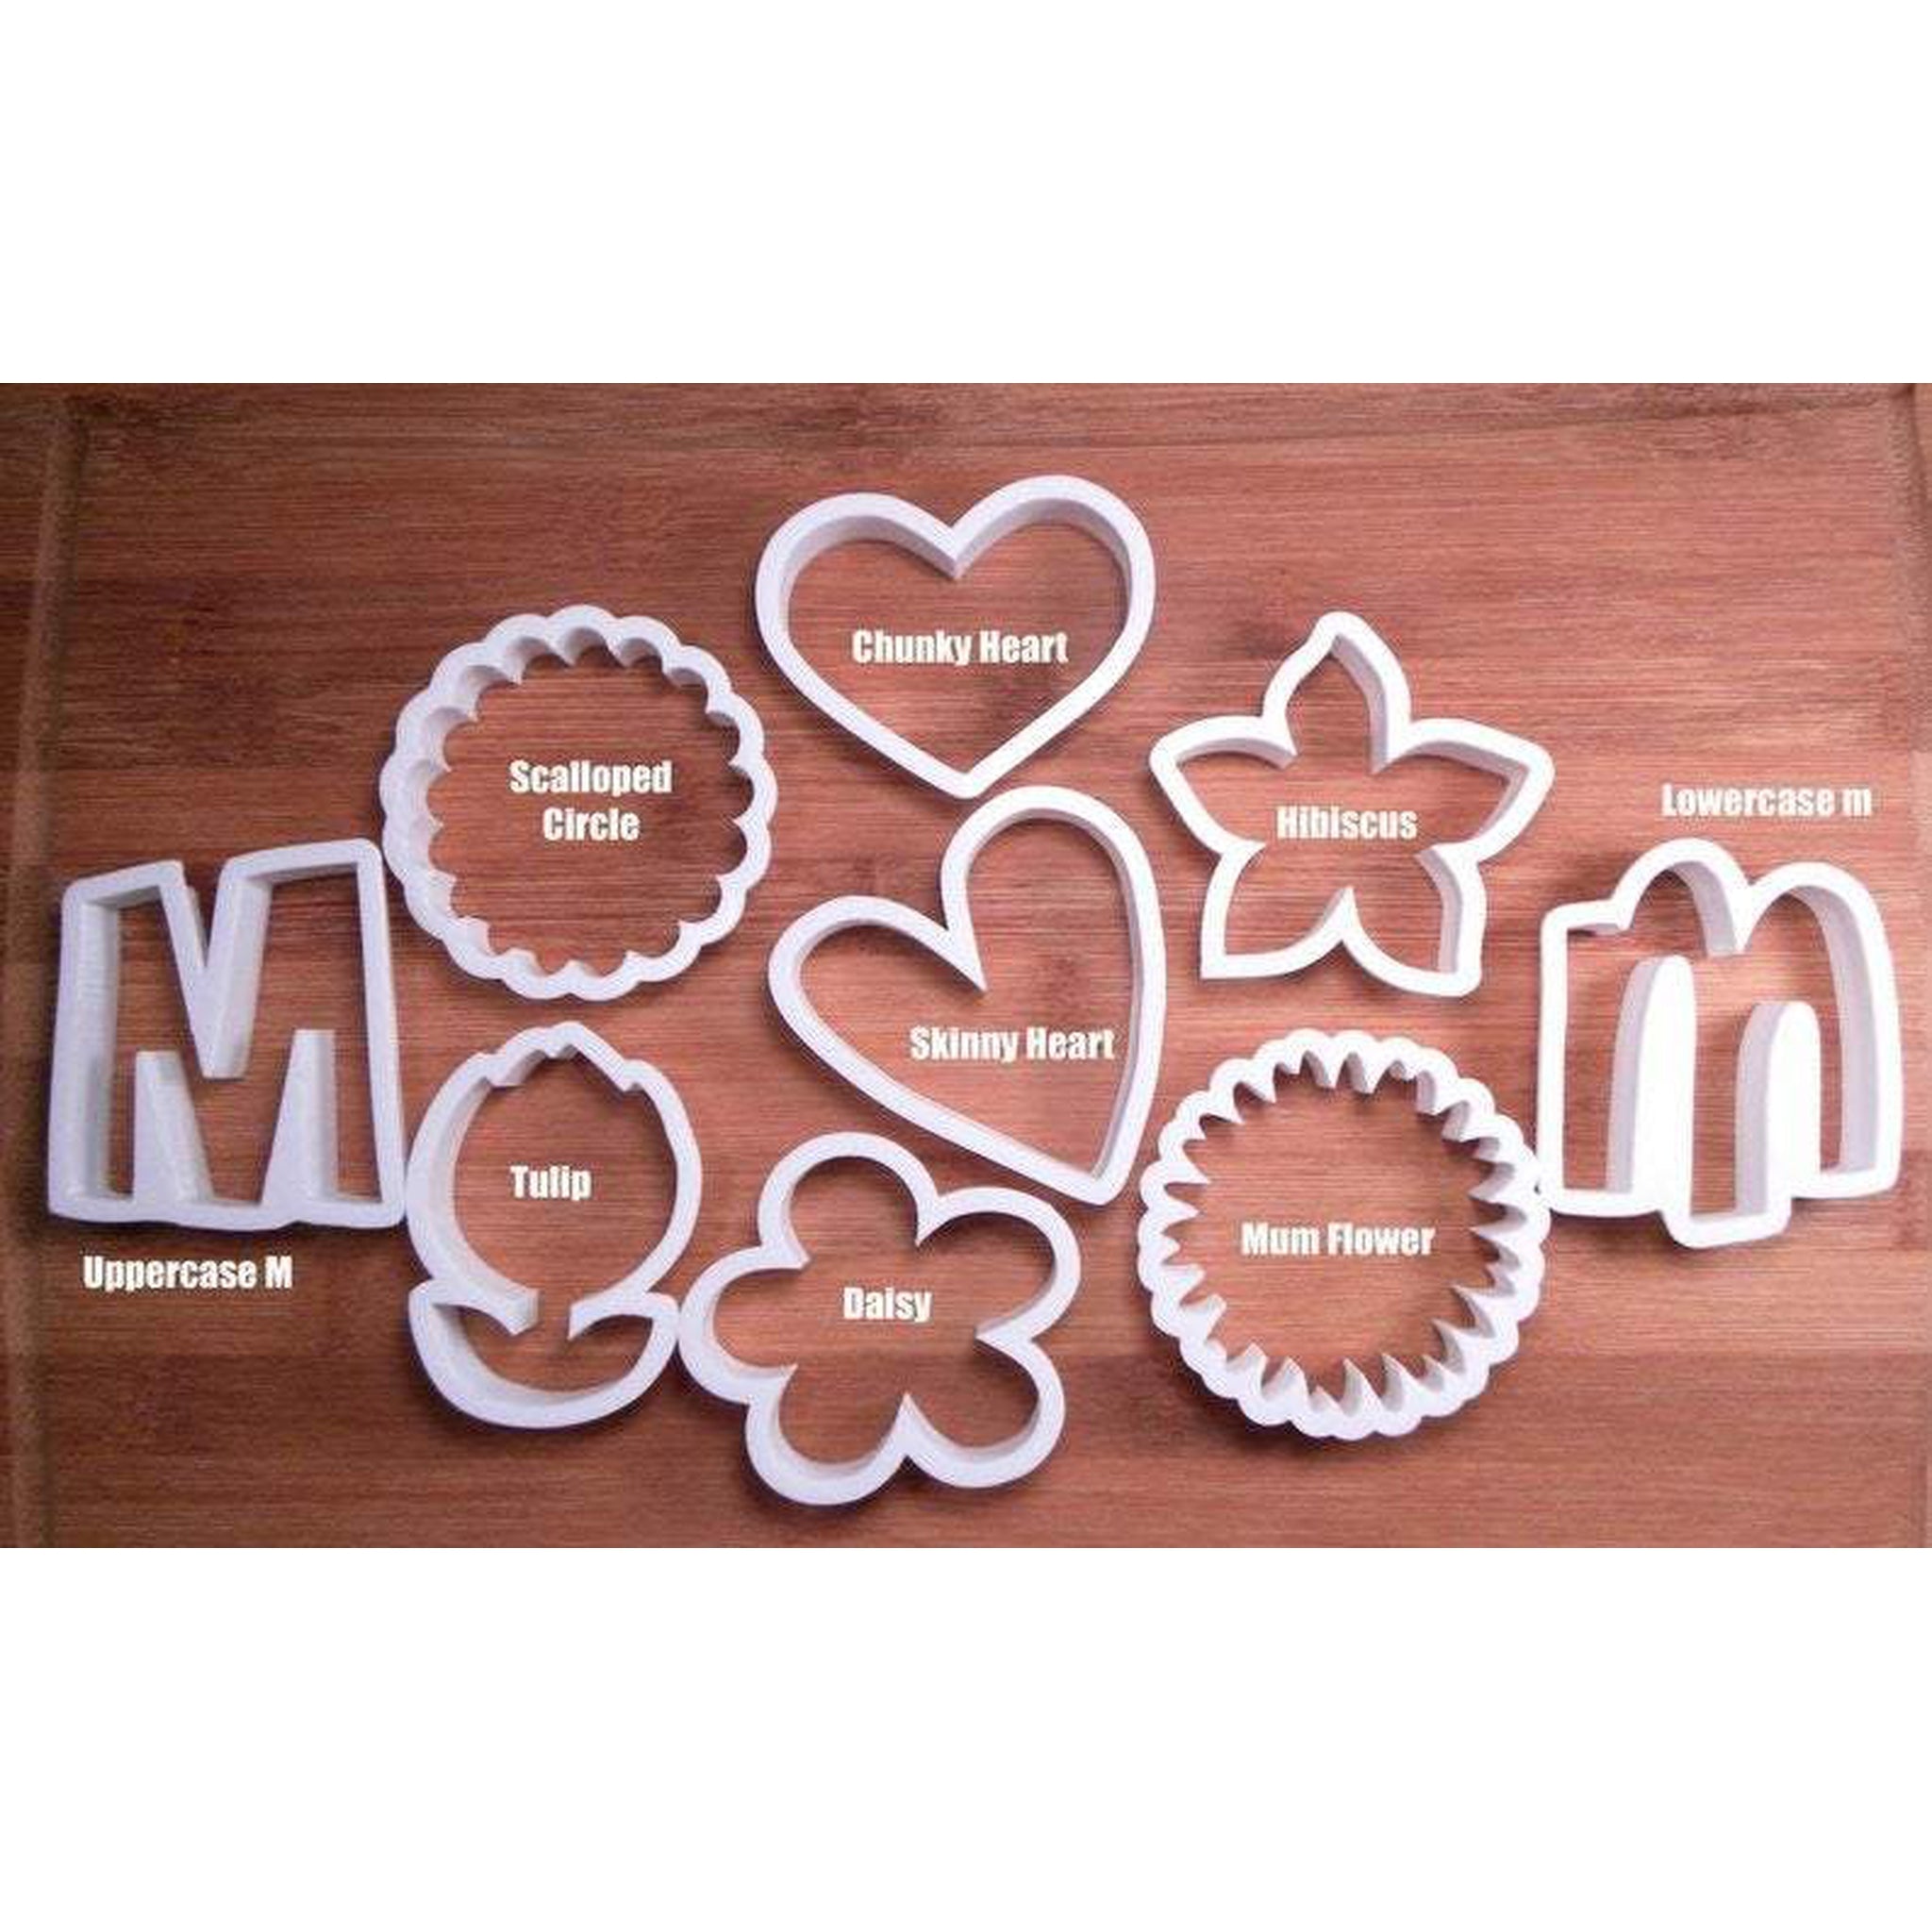 Chunky Heart Cookie Cutter